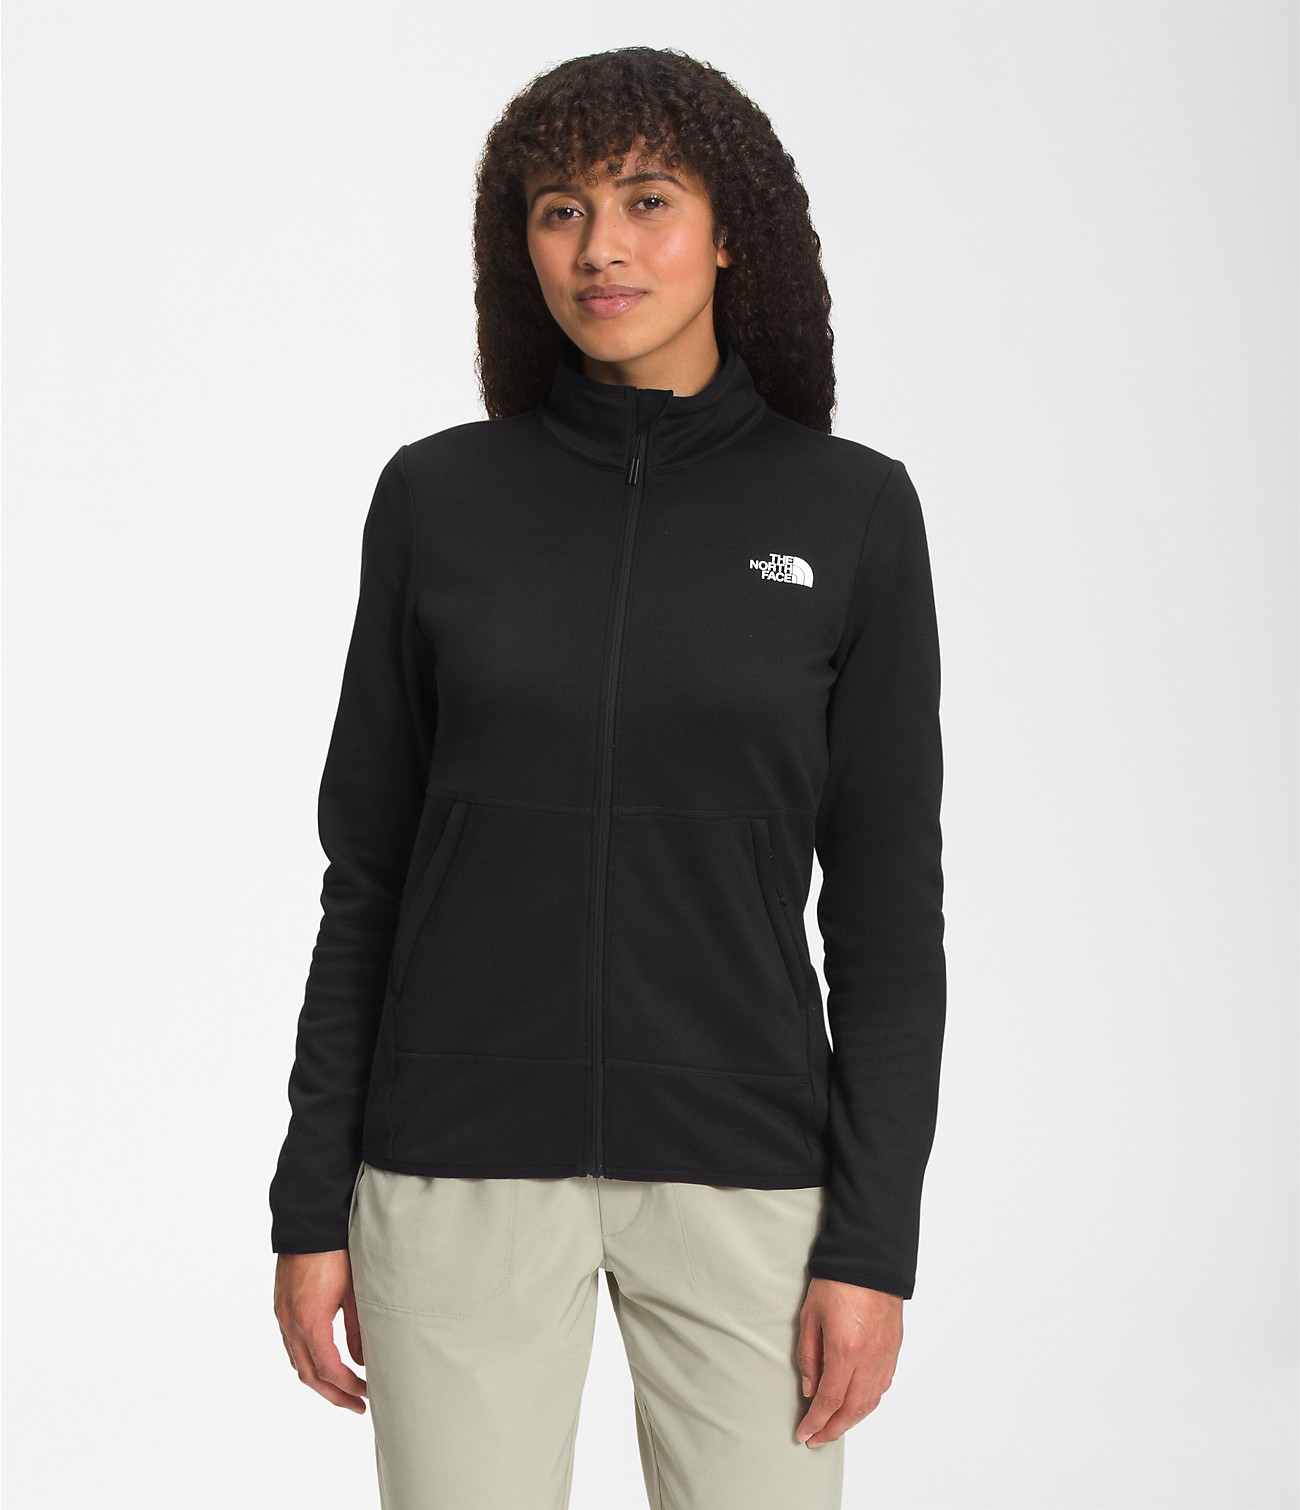 Unlock Wilderness' choice in the Cotopaxi Vs North Face comparison, the Canyonlands Full-Zip by The North Face